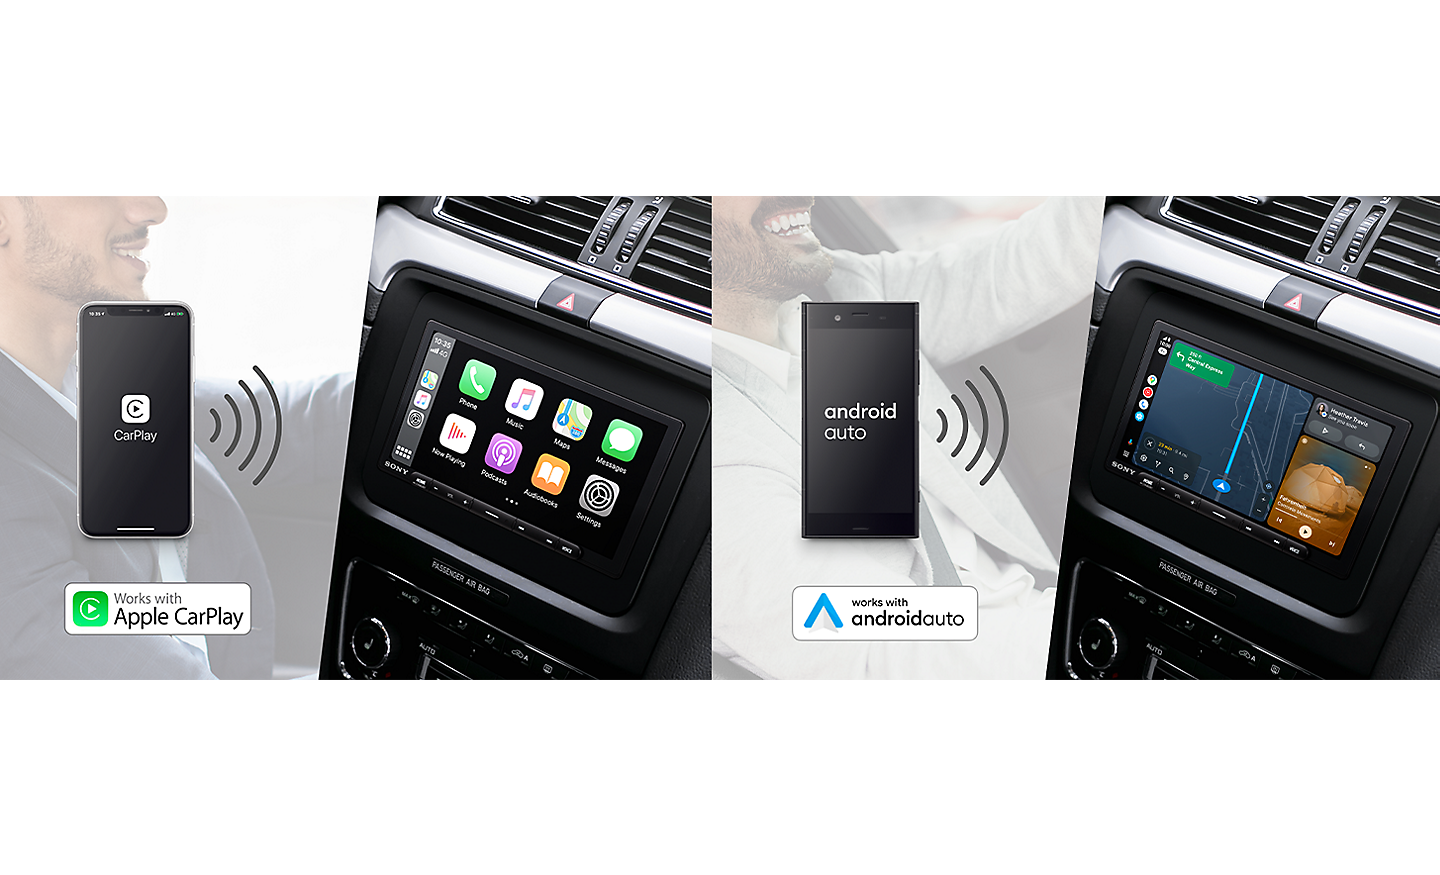 Split image showing how the XAV-AX6050 can connect with Apple CarPlay and AndroidAuto